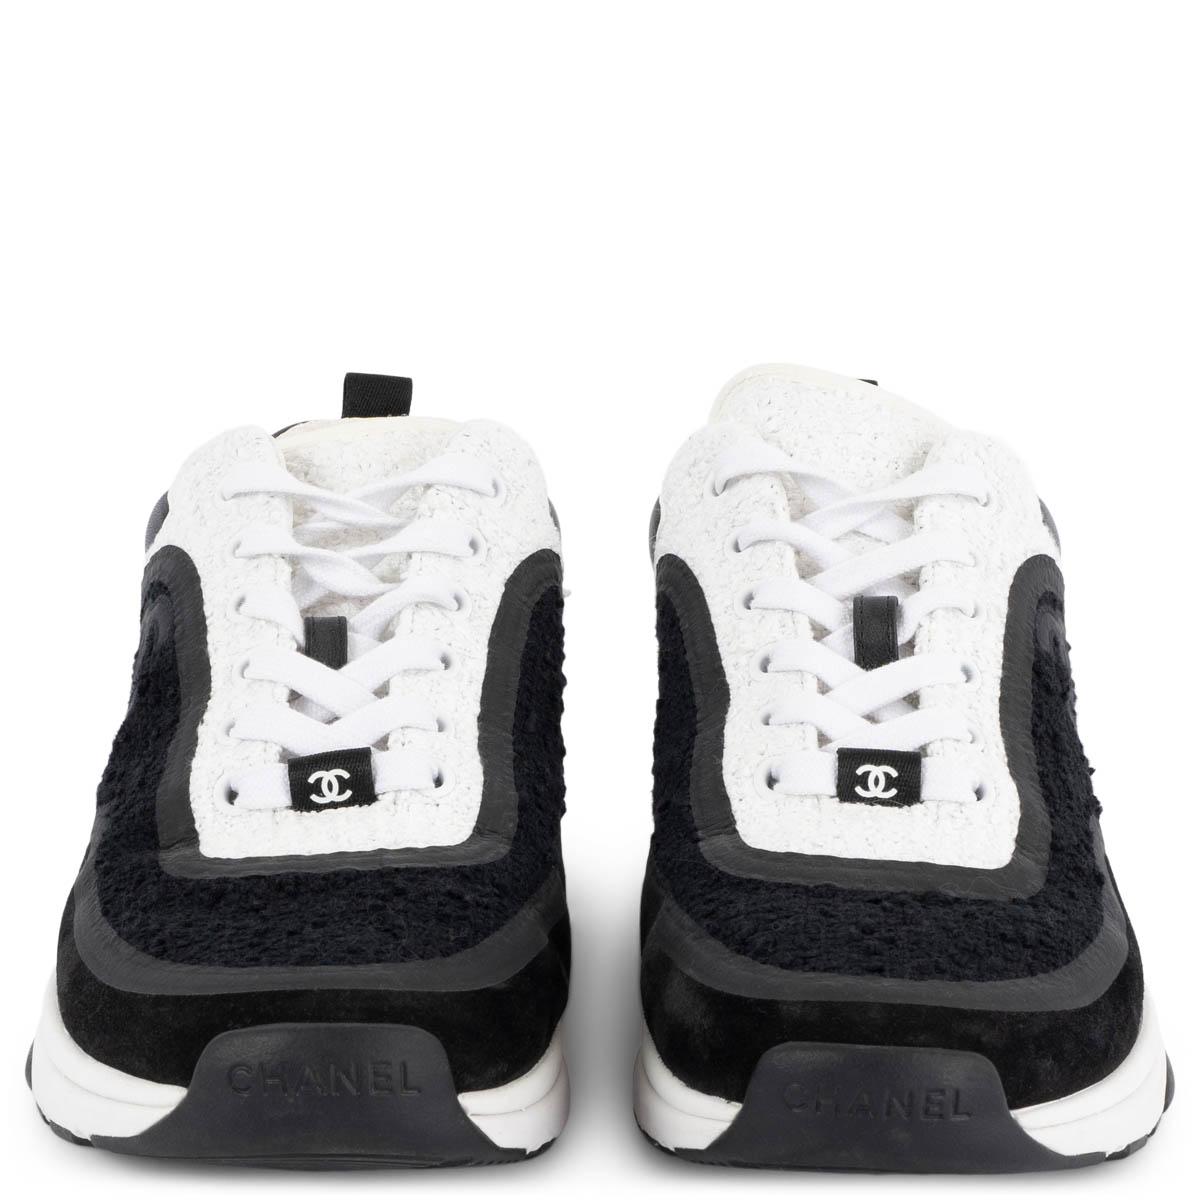 100% authentic Chanel 2021 CC low-top sneakers in black & white bouclé set on a black & white rubber sole with a black padded leather detail on the heel. Have been worn and are in excellent condition. 

Measurements
Model	Chanel21S G34360
Imprinted